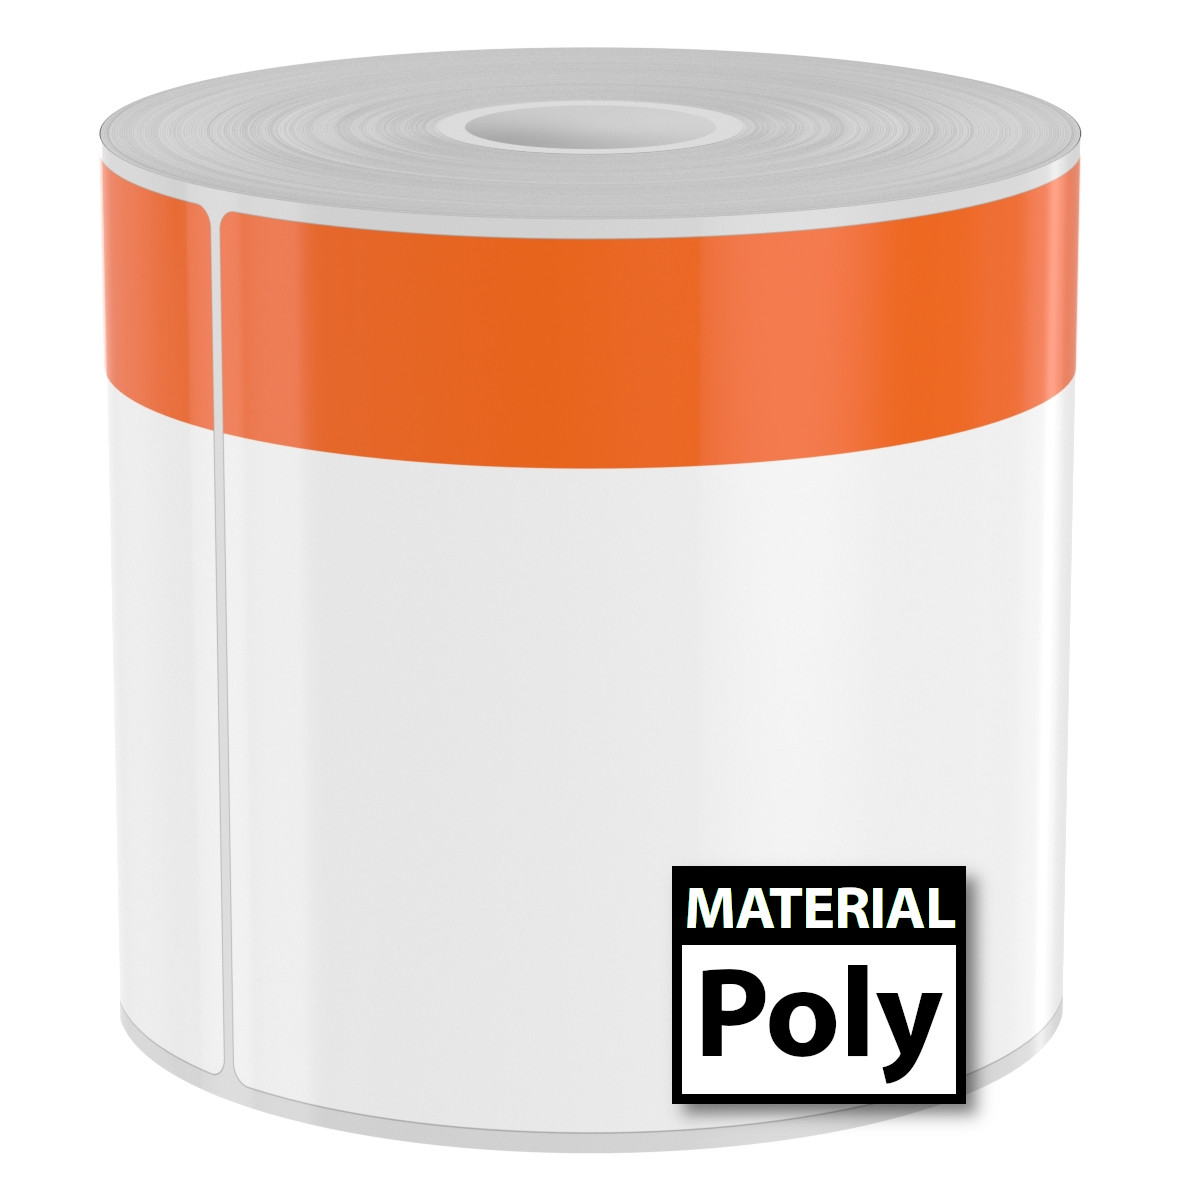 Detail view for 250 4" x 6" High-Performance Poly Arc Flash Labels with Orange Header